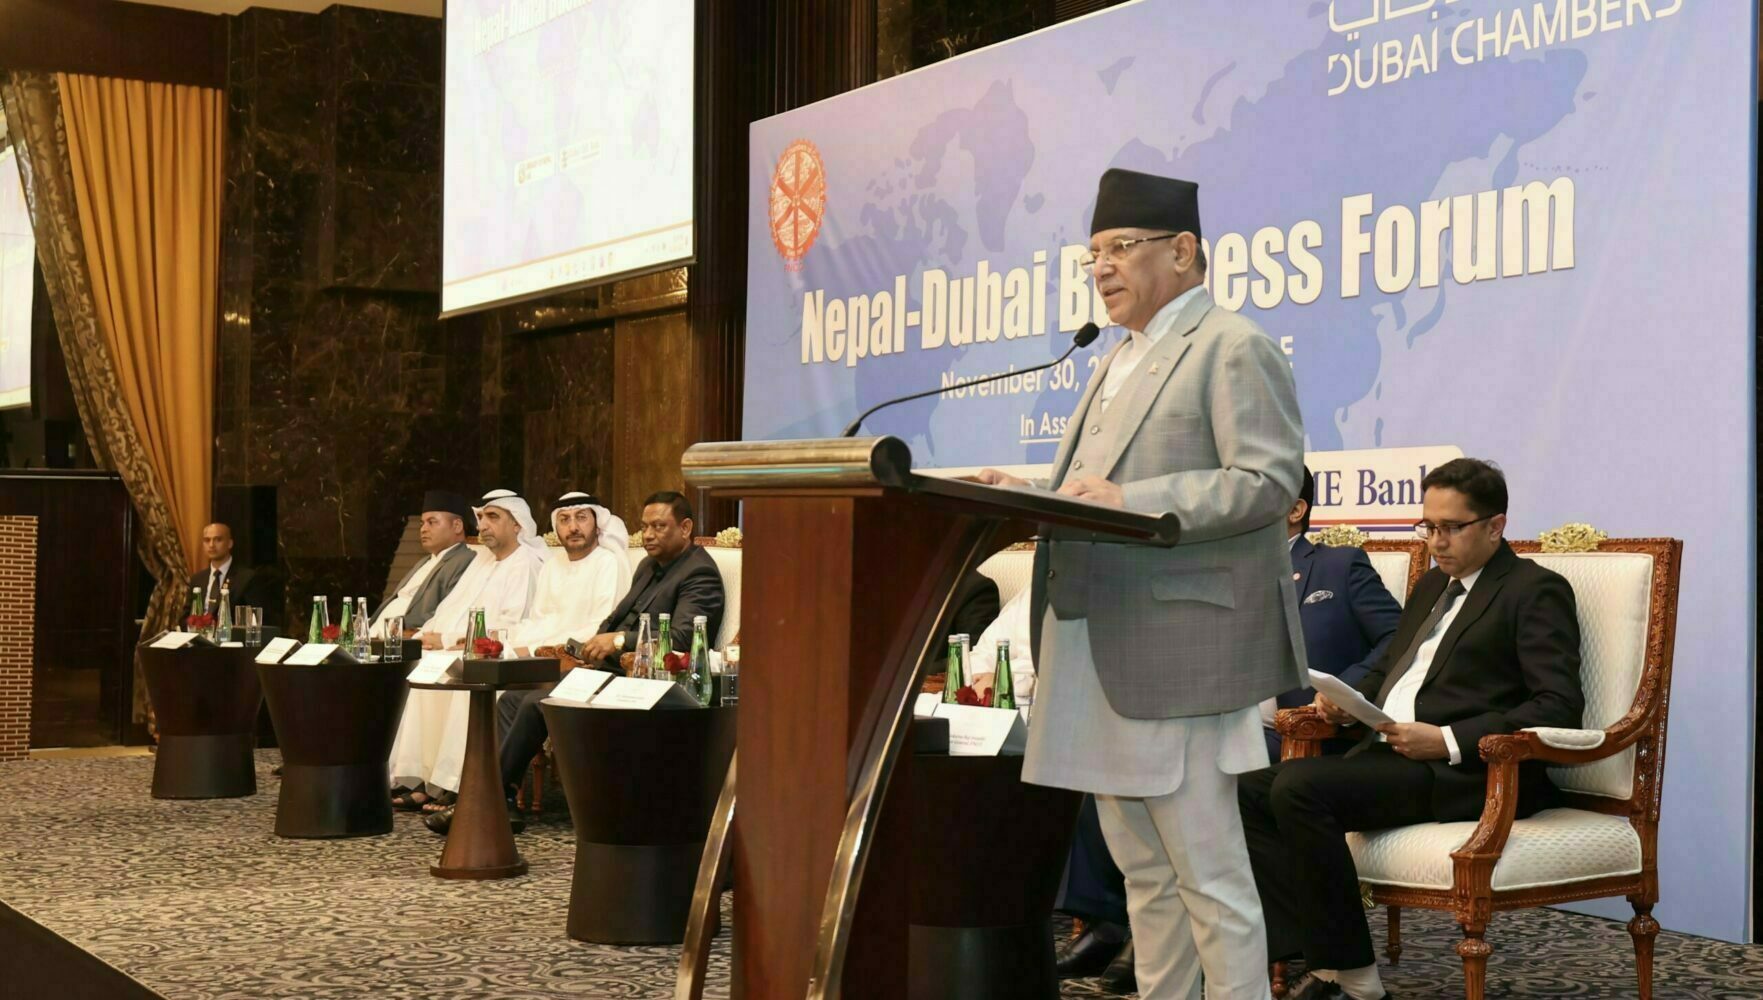 PM Dahal invites business community of UAE to invest in Nepal